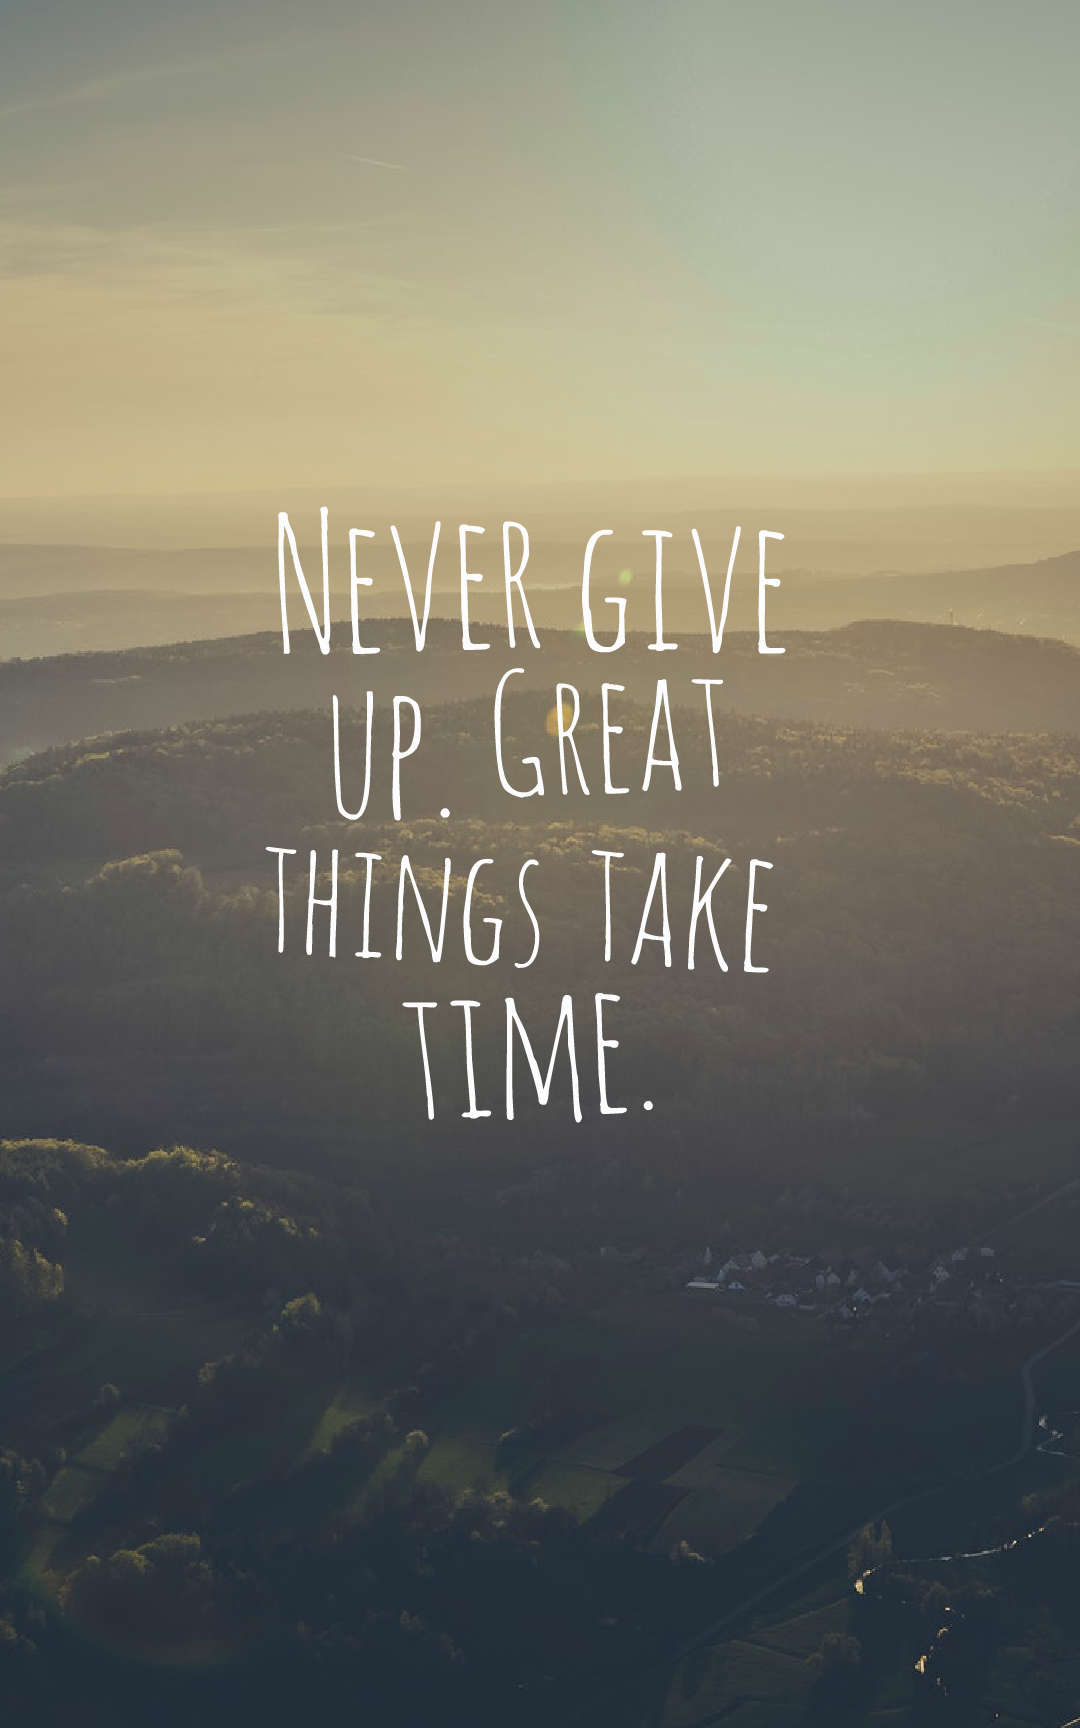 Never give up. Great things take time.